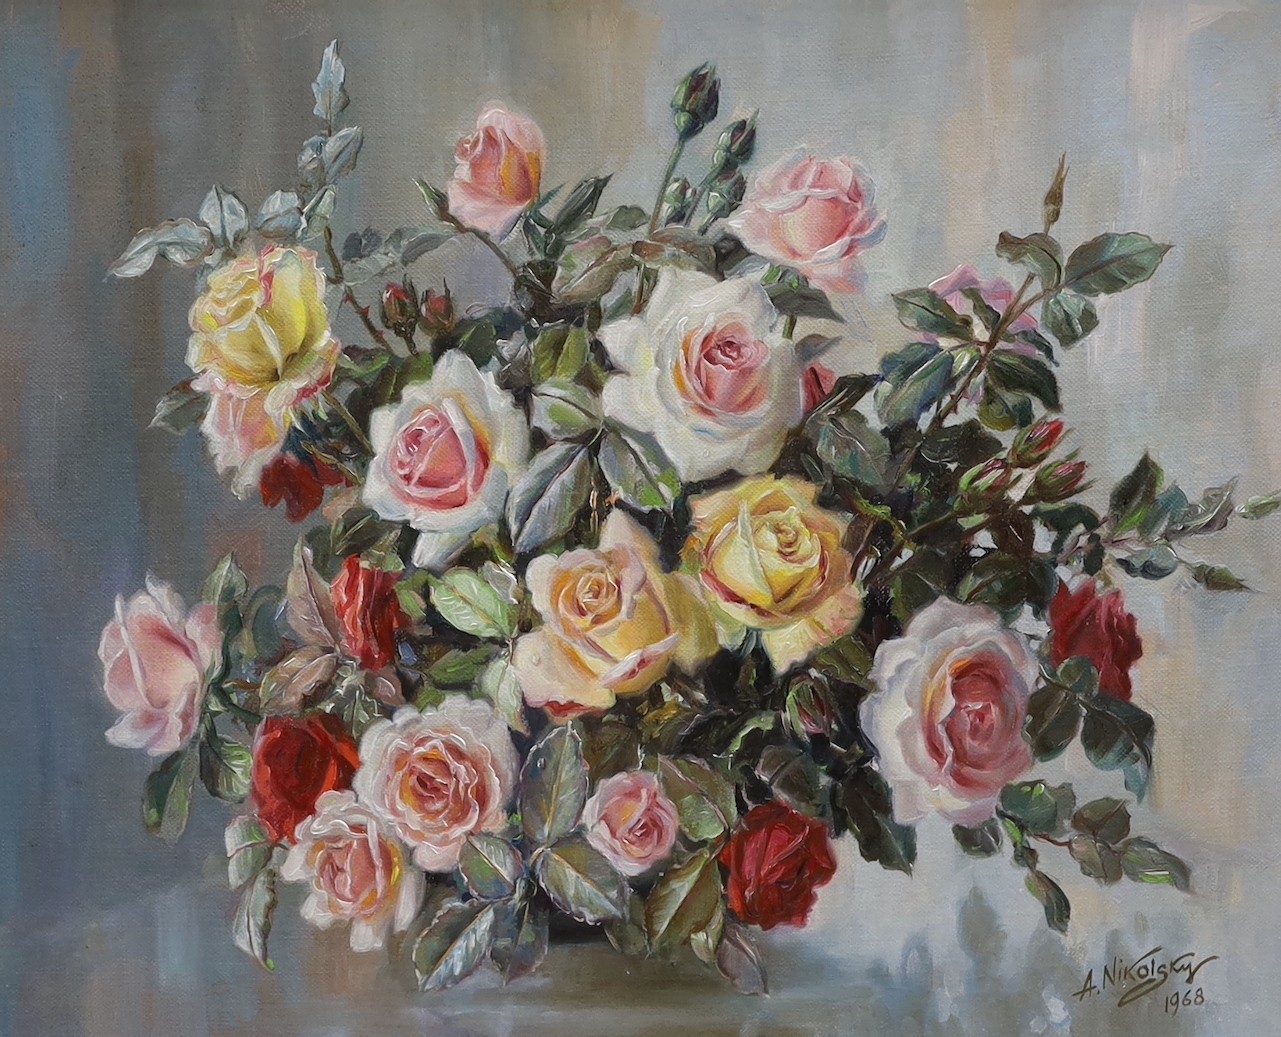 Athanasius Nikolsky. (fl.1950-1980), oil on canvas, Still life of mixed roses, signed and dated 1968, 50 x 60cm